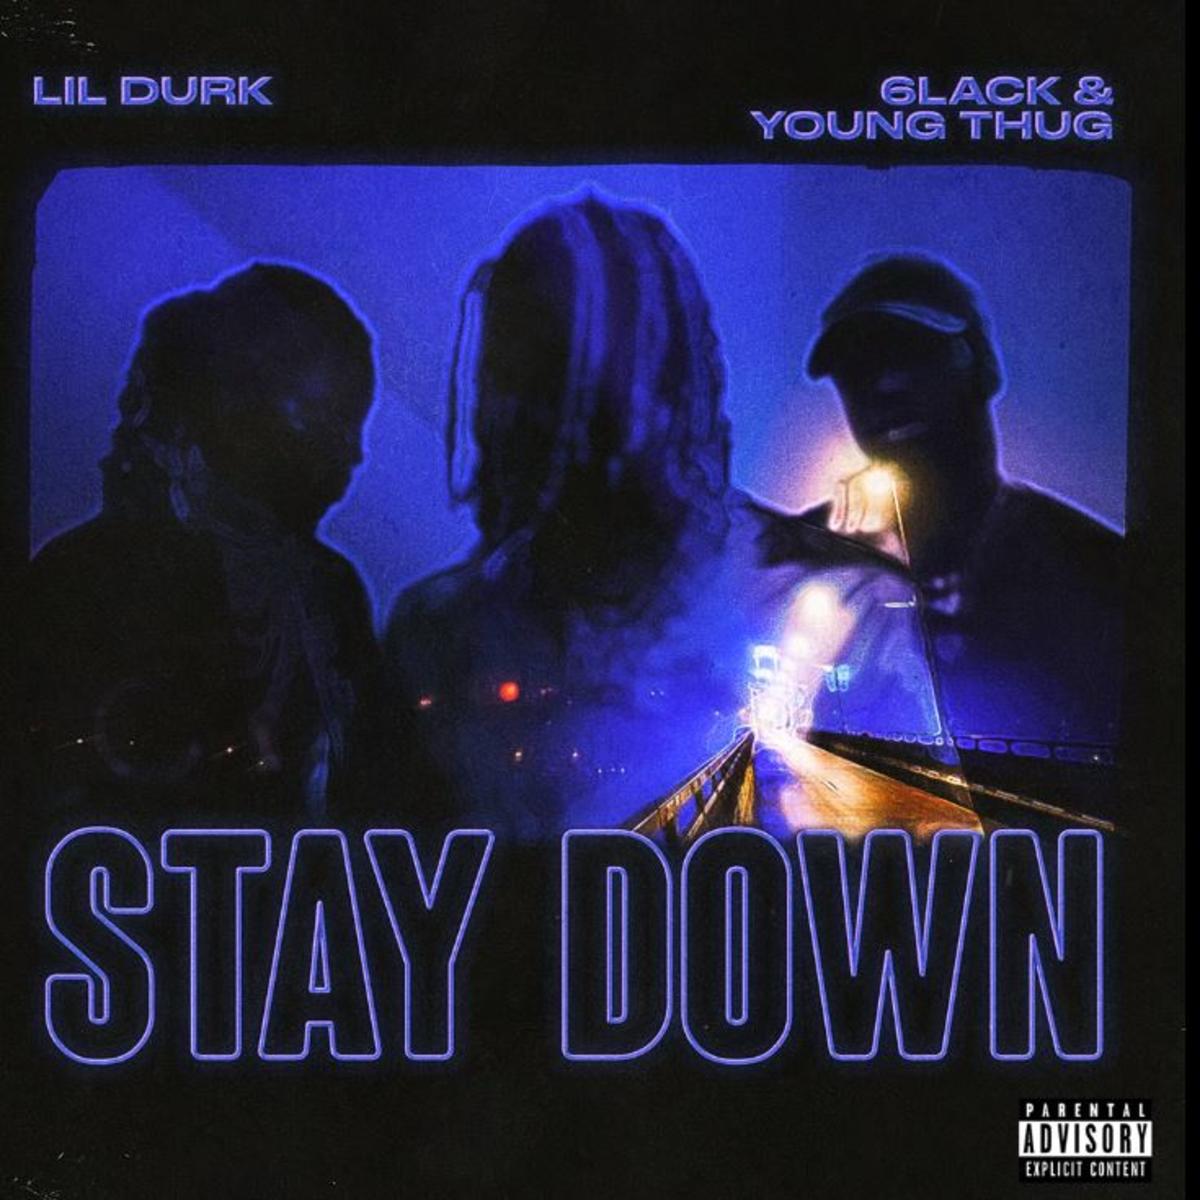 Lil Durk, 6LACK & Young Thug Unite For “Stay Down”